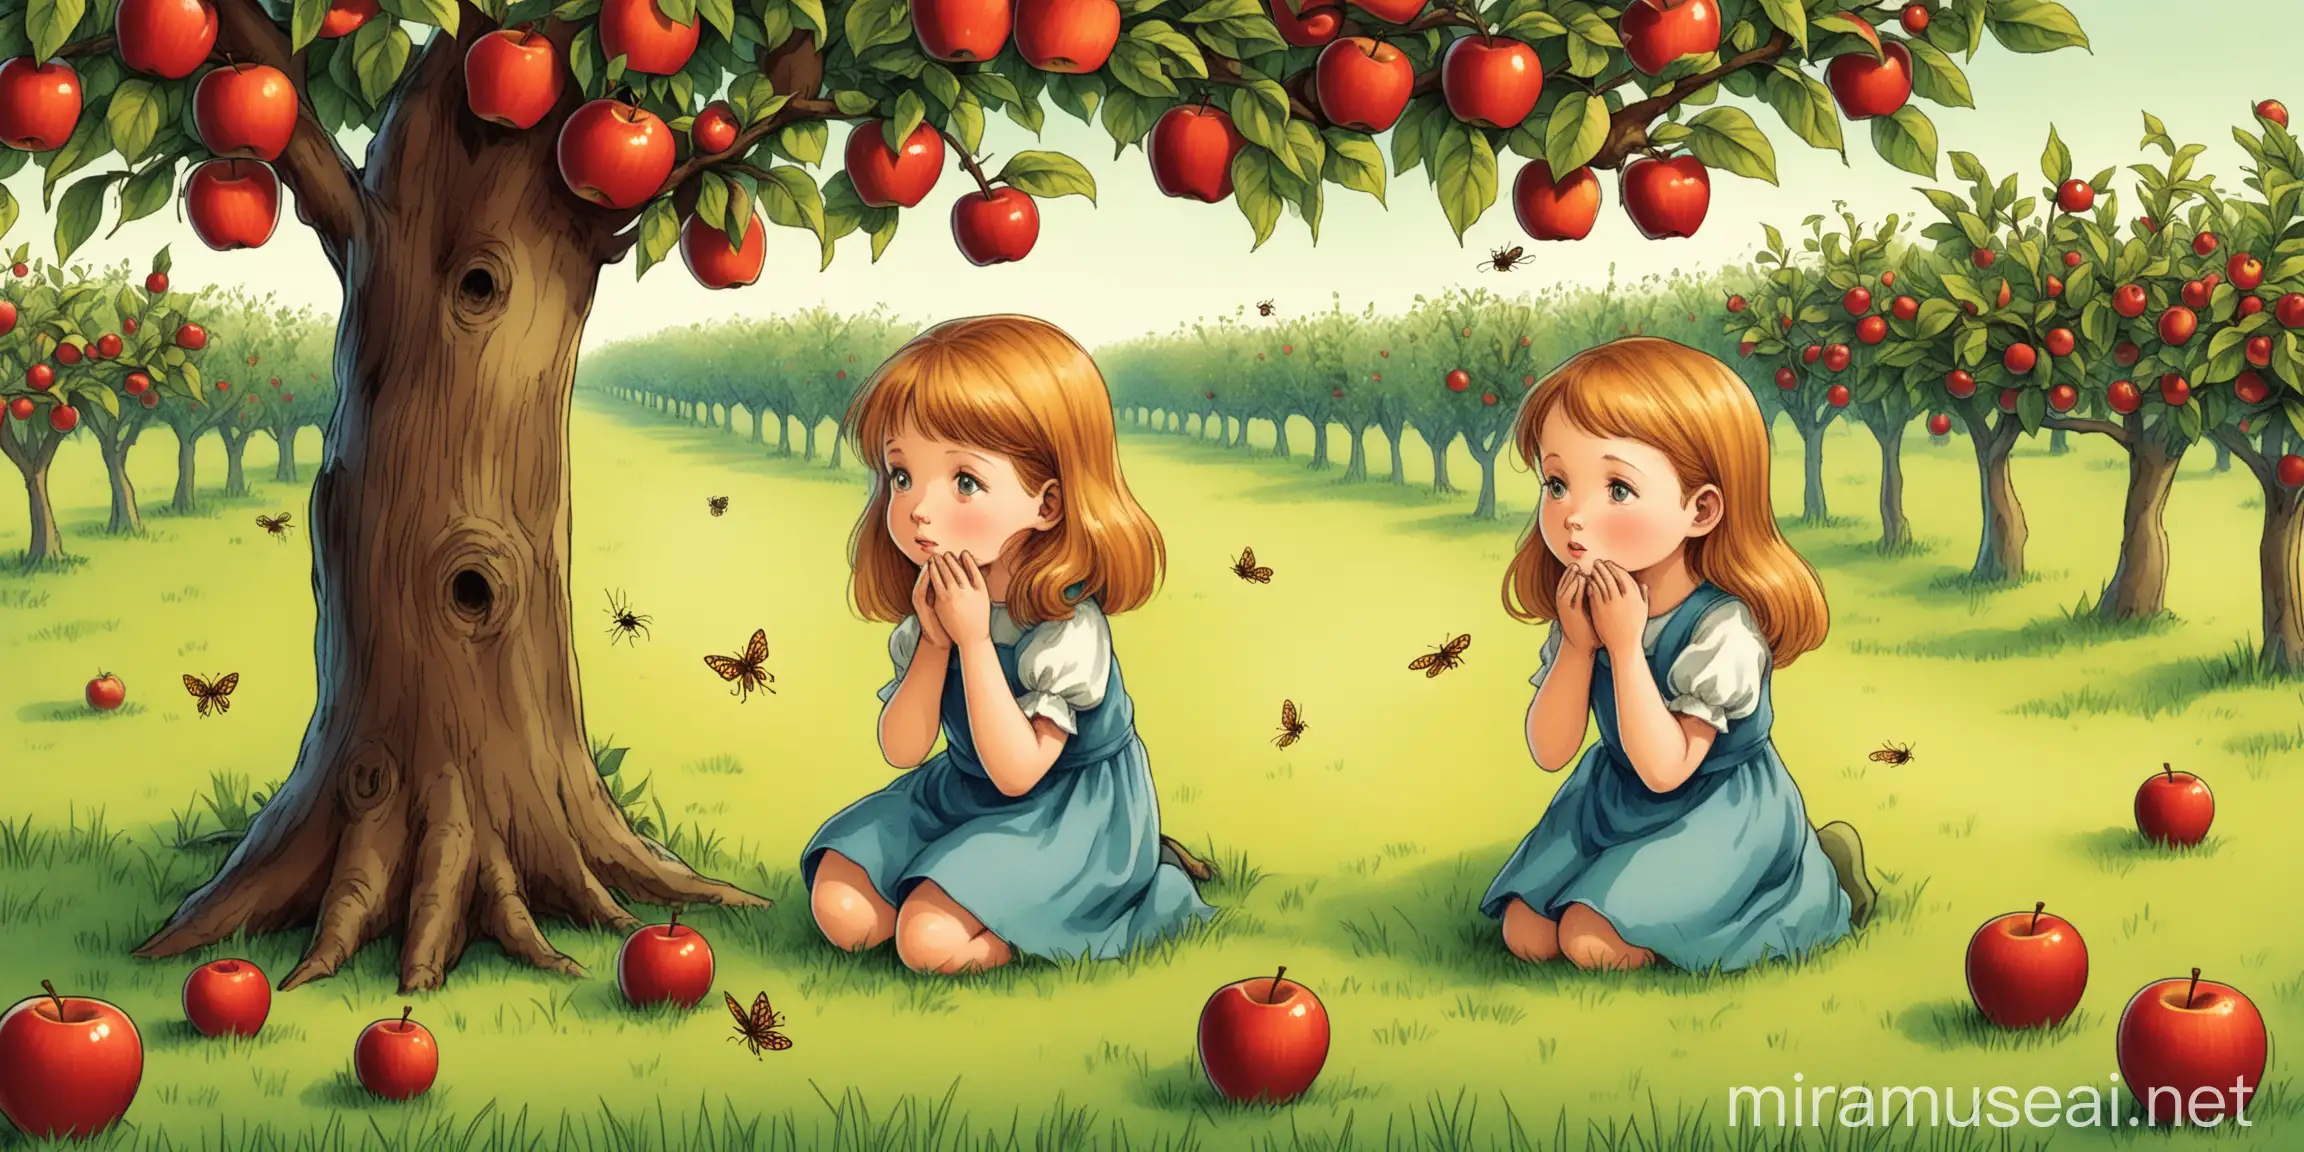 a children book style illustration: a girl knees down and listens to the insect singing in the orchard with apple trees.